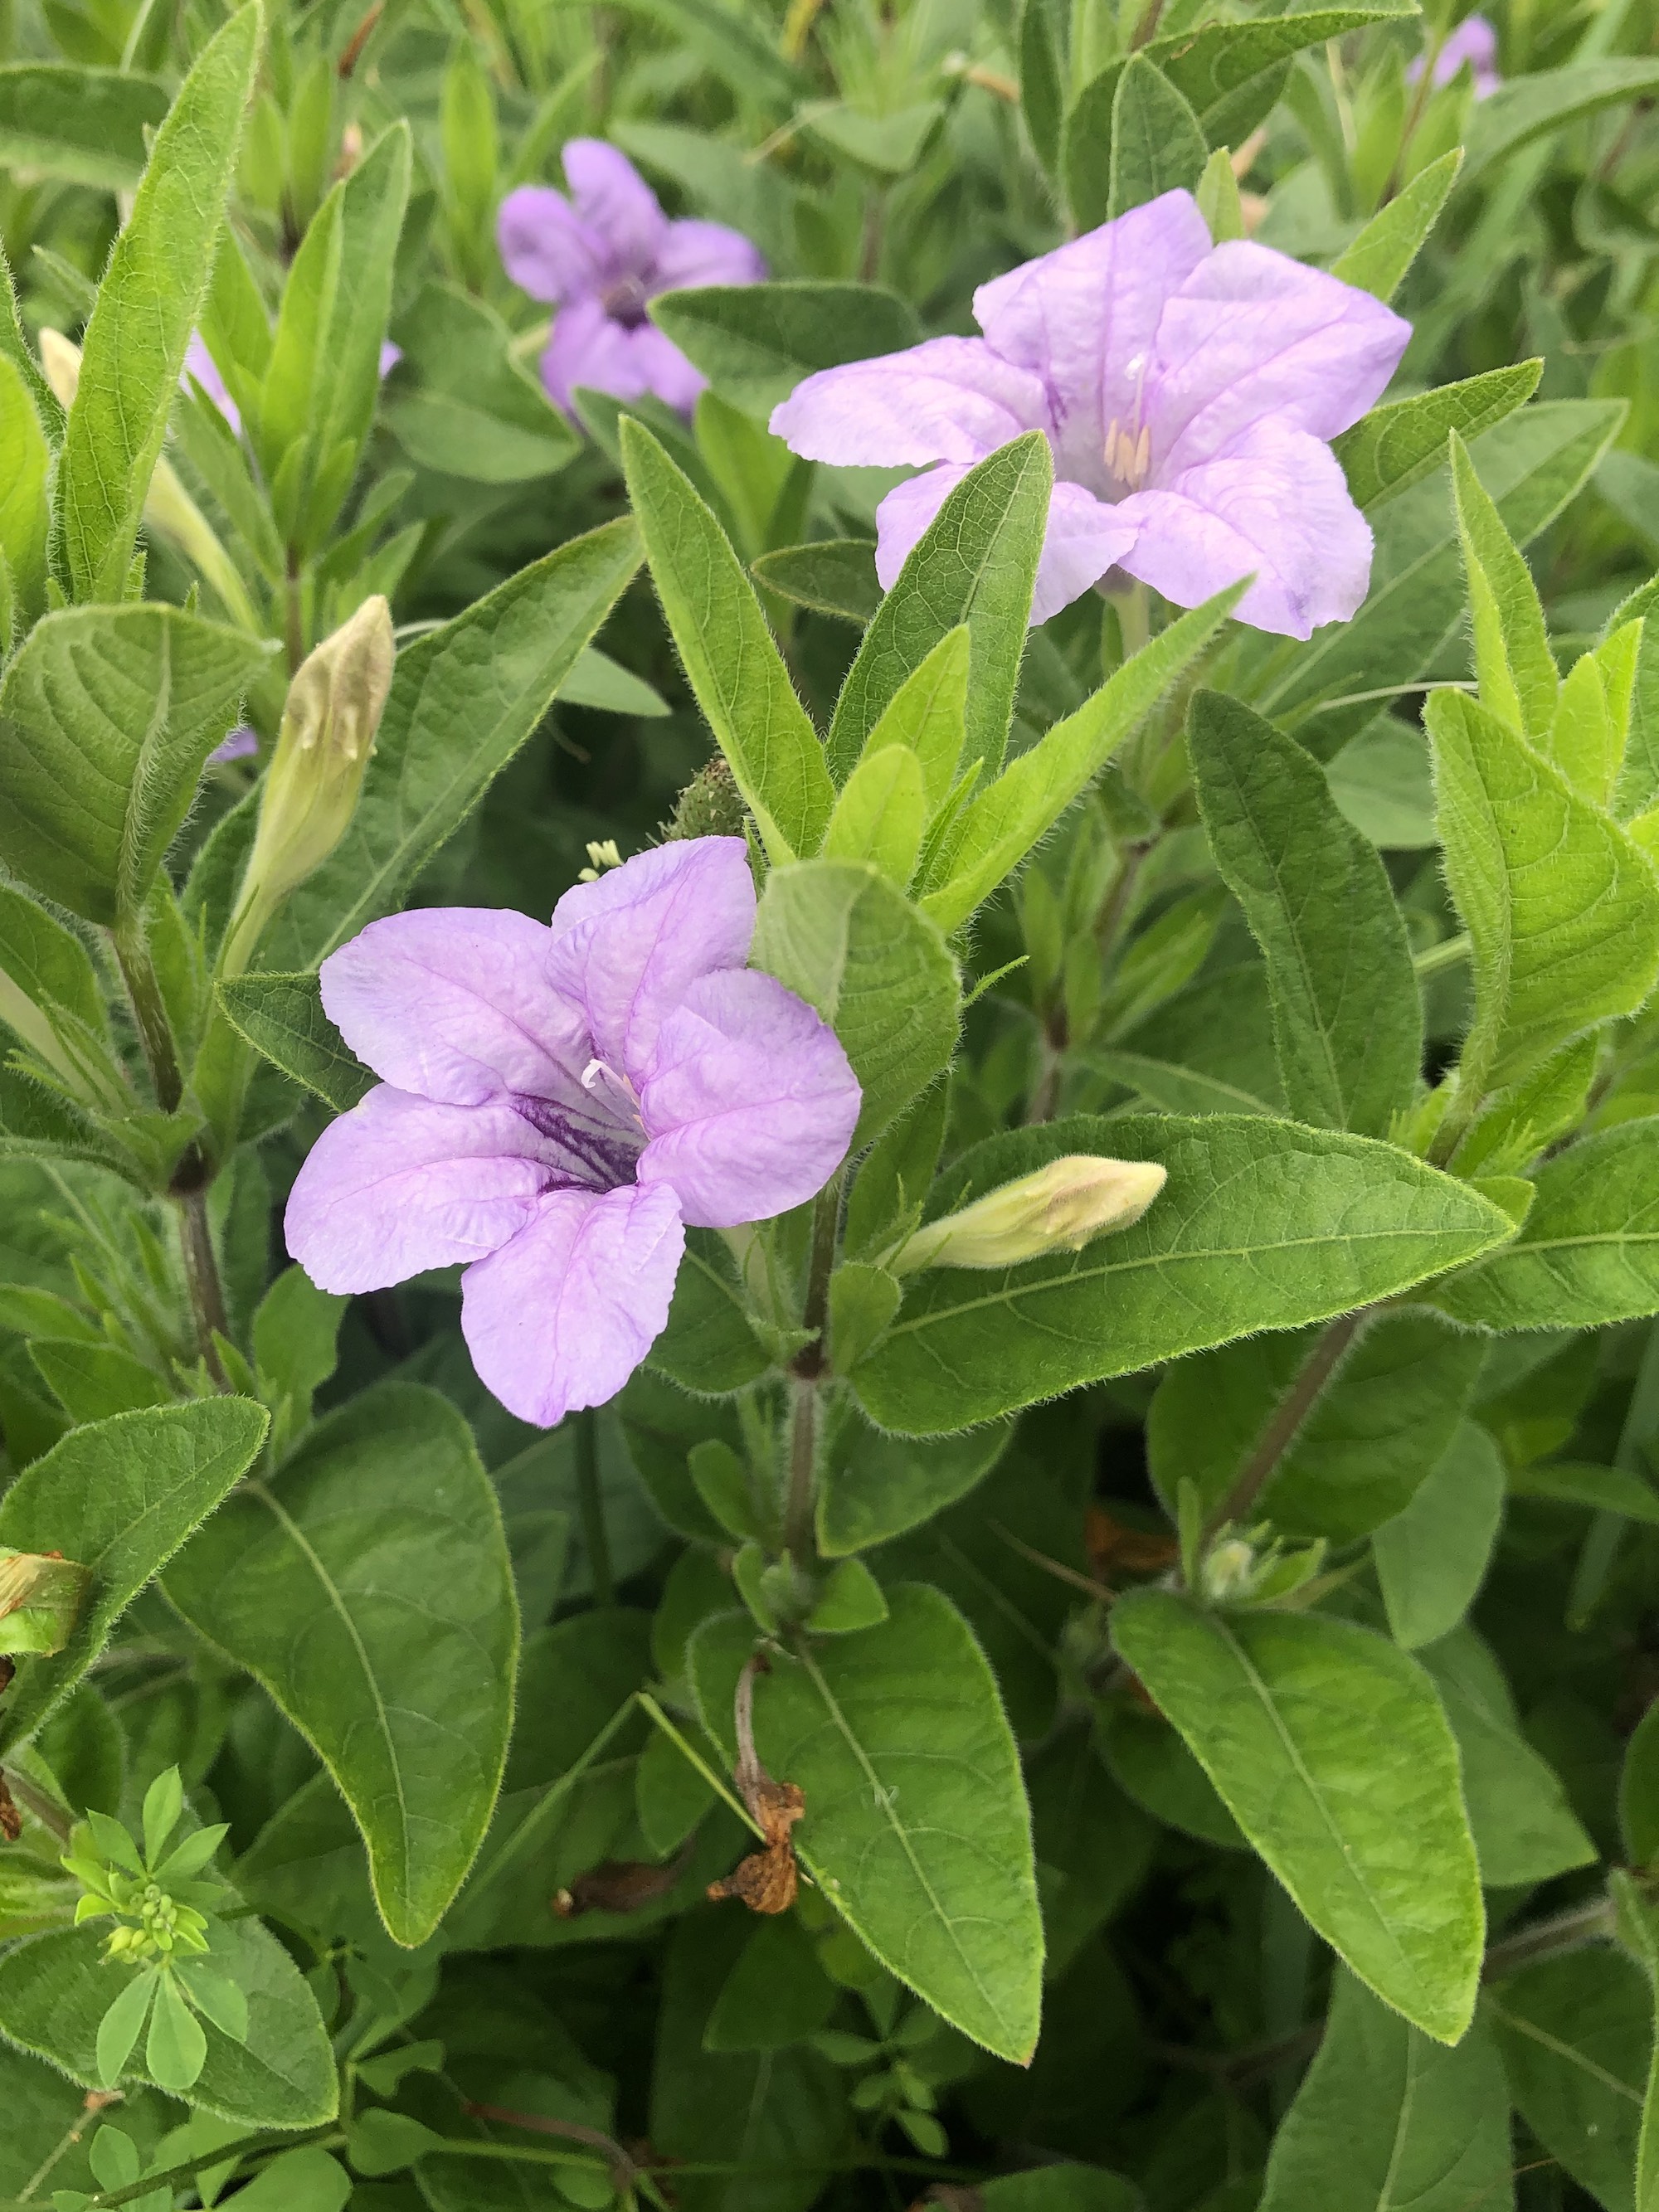 Wild Petunia off of Bike Path behind Gregory Street in Madison, Wisconsin on June 28, 2021.